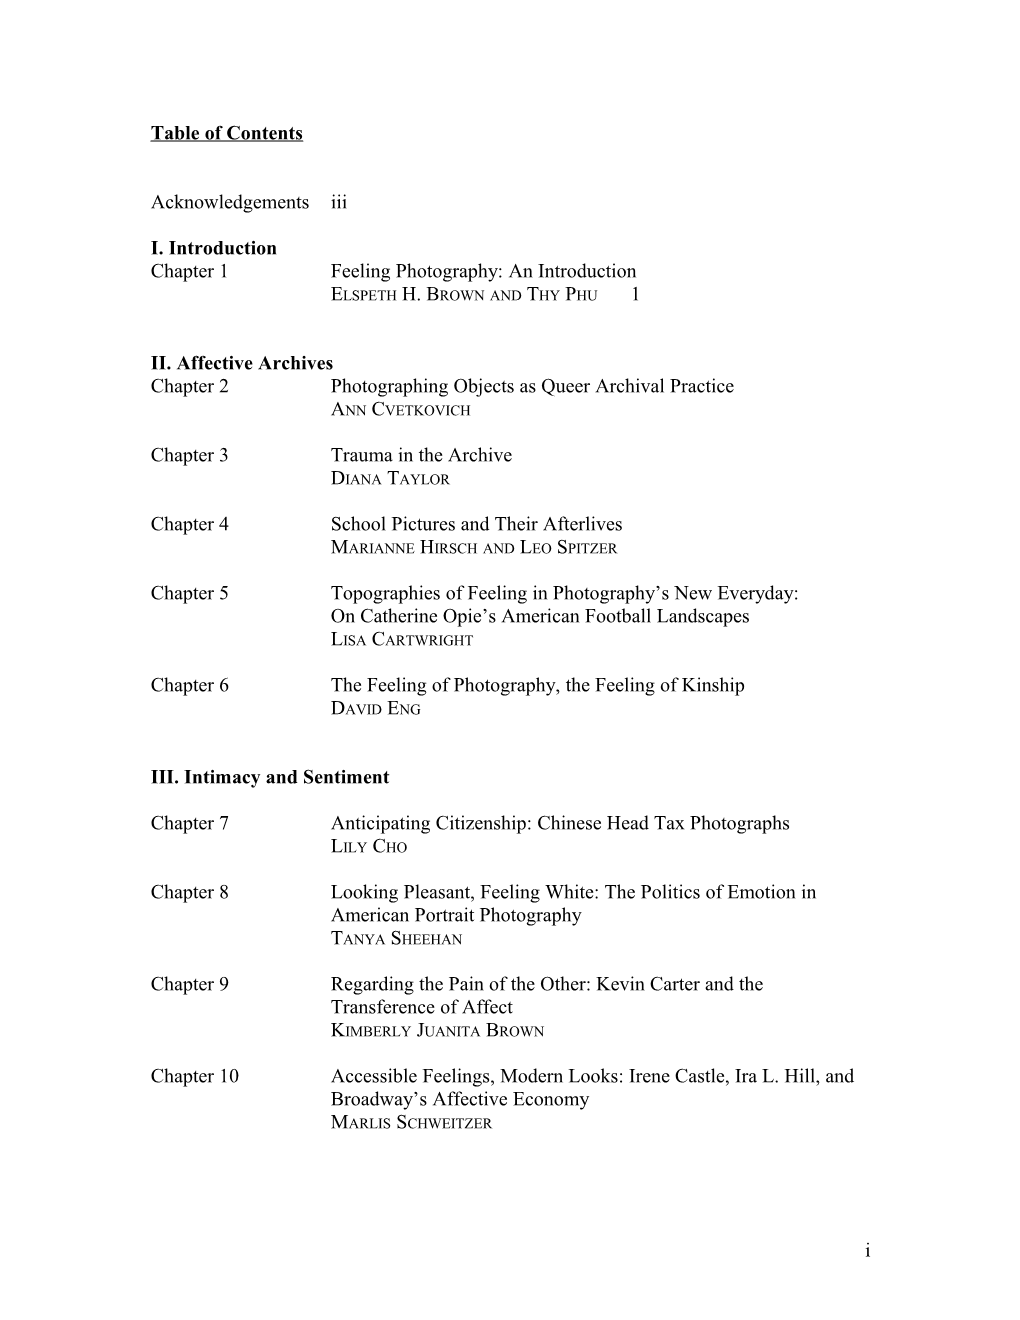 Table of Contents s227